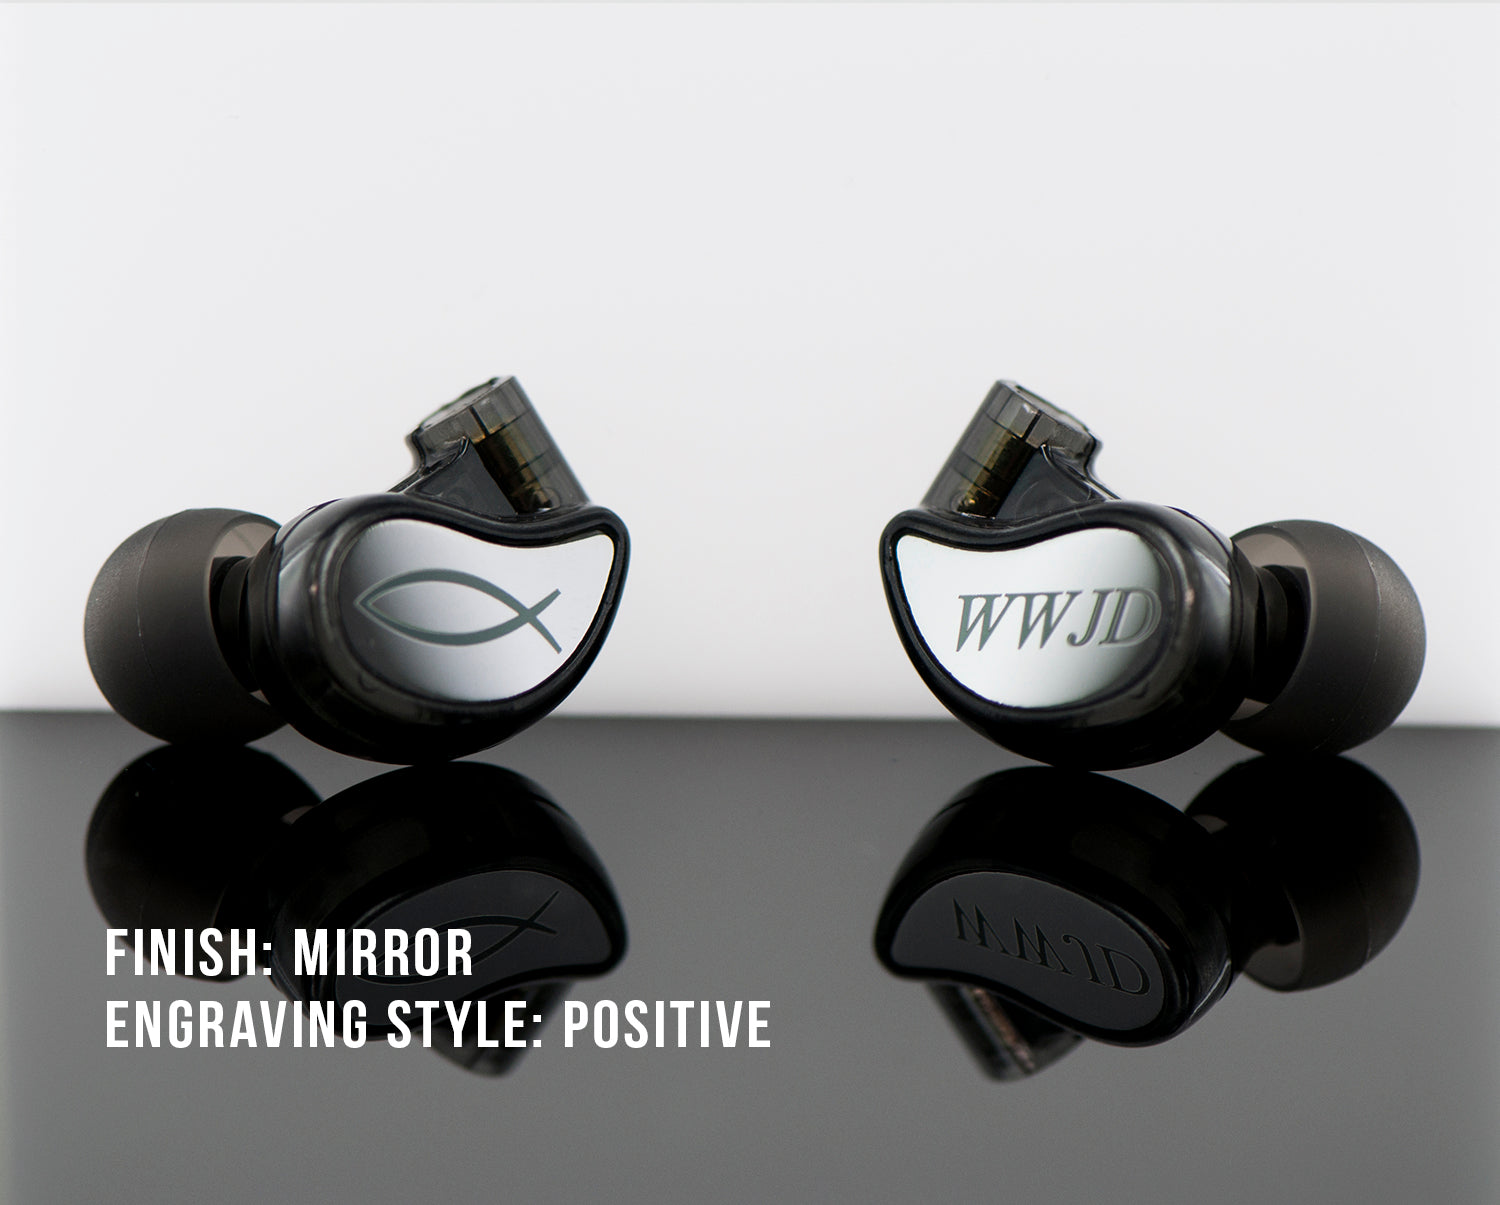 Two customized in-ear monitors with mirror finish, one engraved with an "o" symbol and the other with "wwjd," displayed on a reflective surface with text describing finish and engraving style.